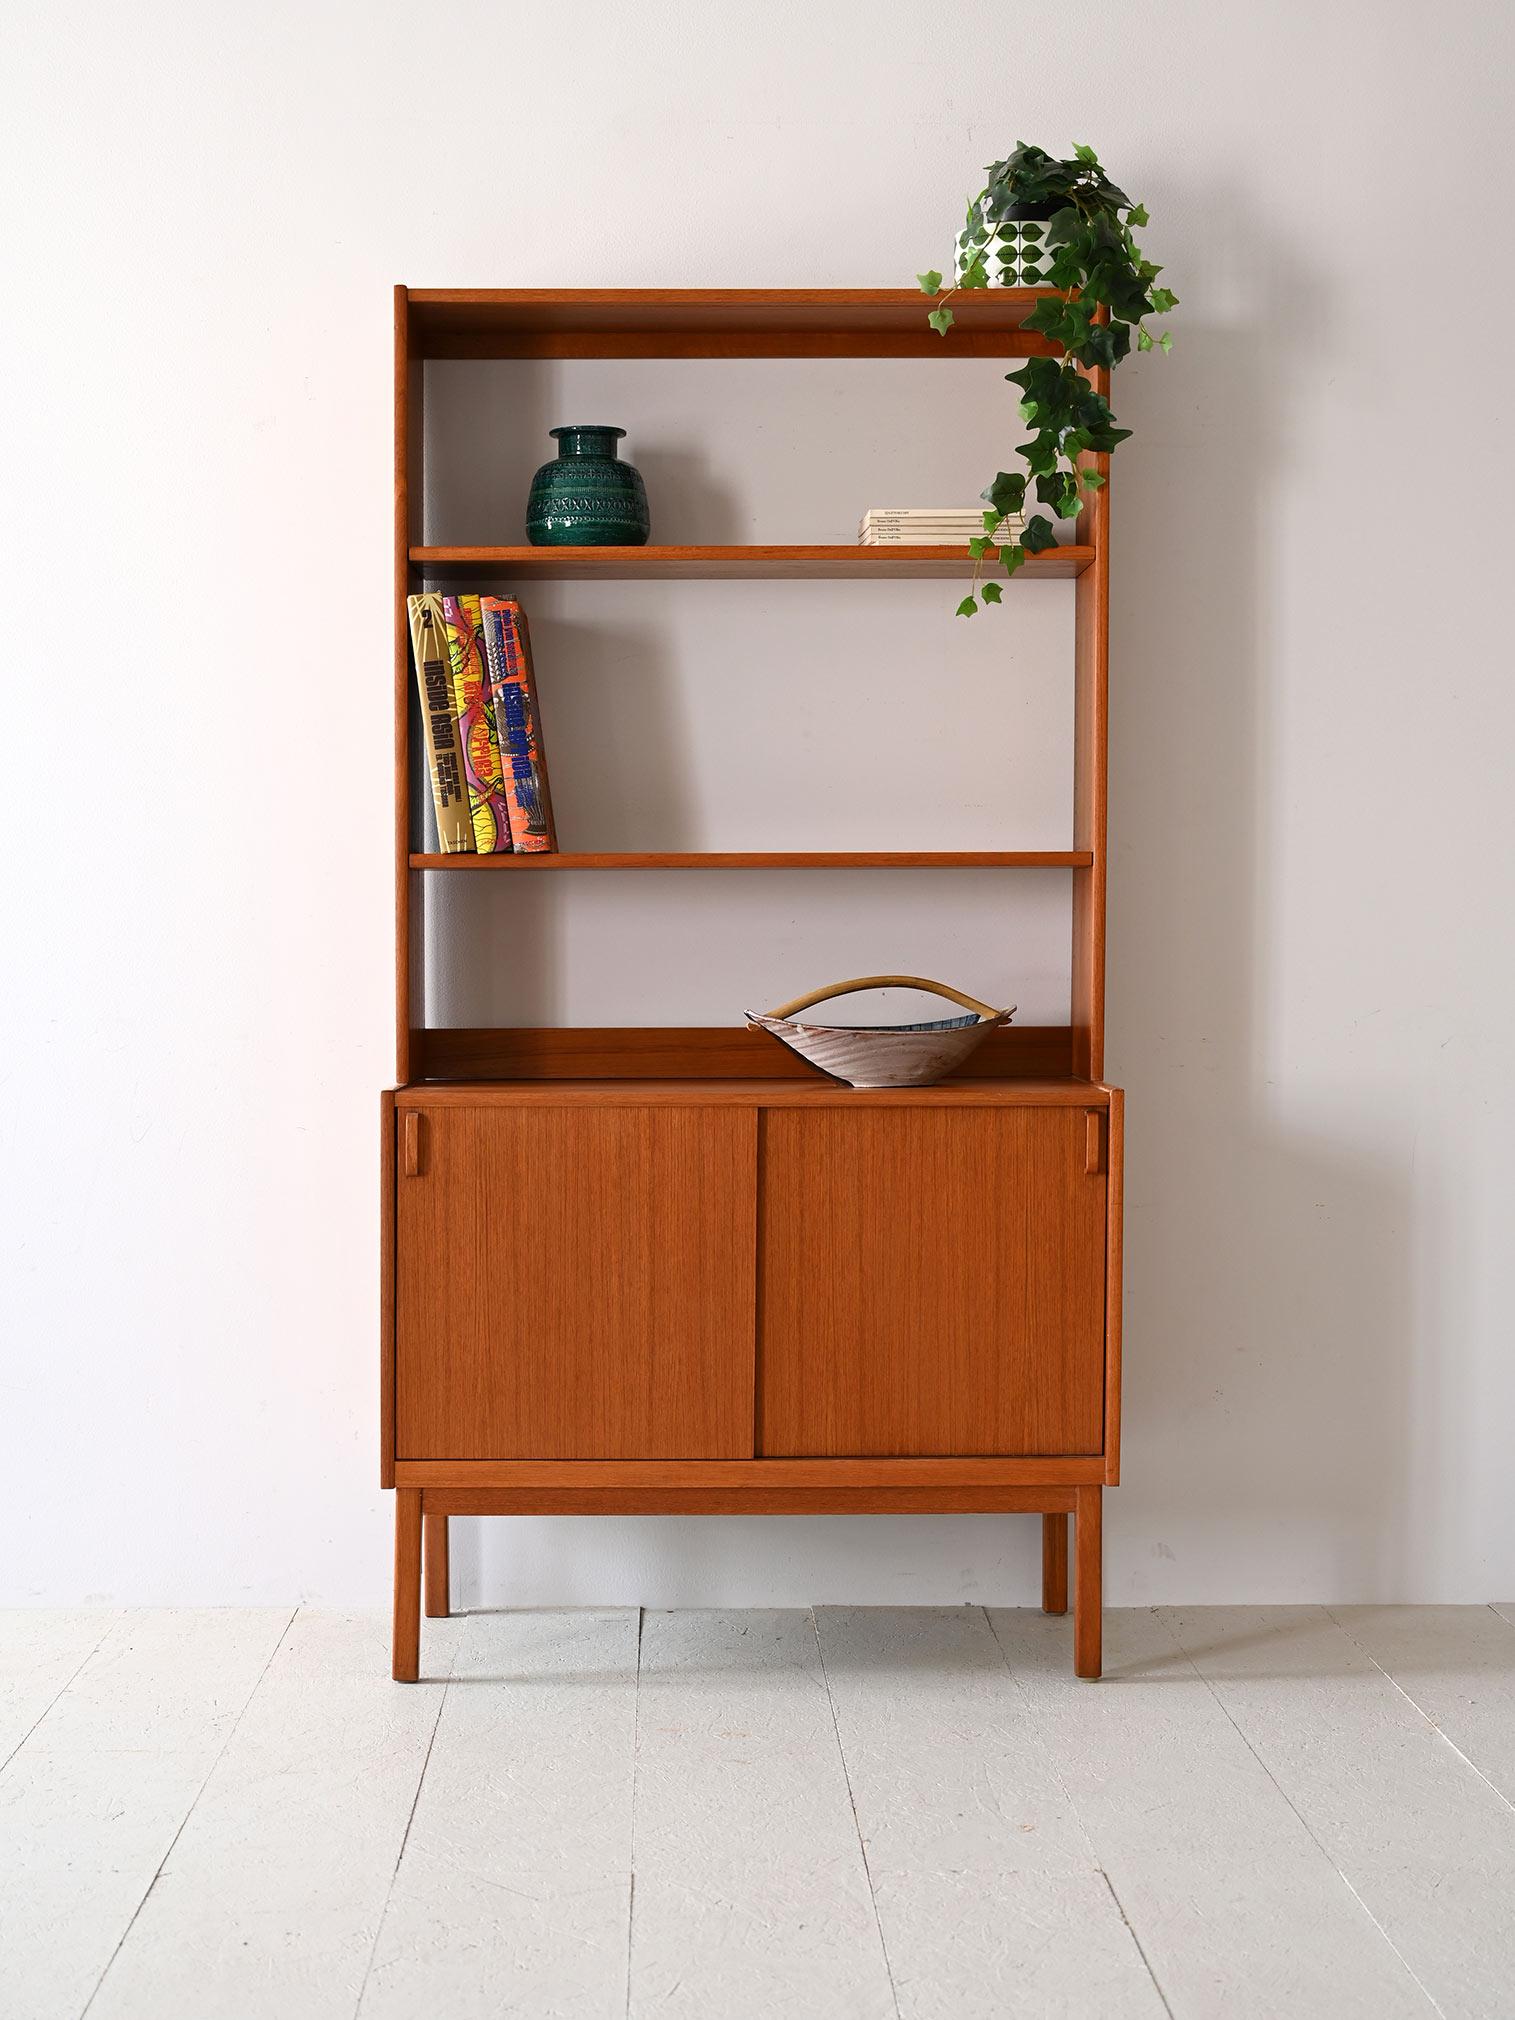 Scandinavian furniture from the 1960s that combines elegance and practicality. 
The warmth of the teak frame blends with a design that prioritizes usability: open shelves for books and art objects above a closed container to hide what you prefer to